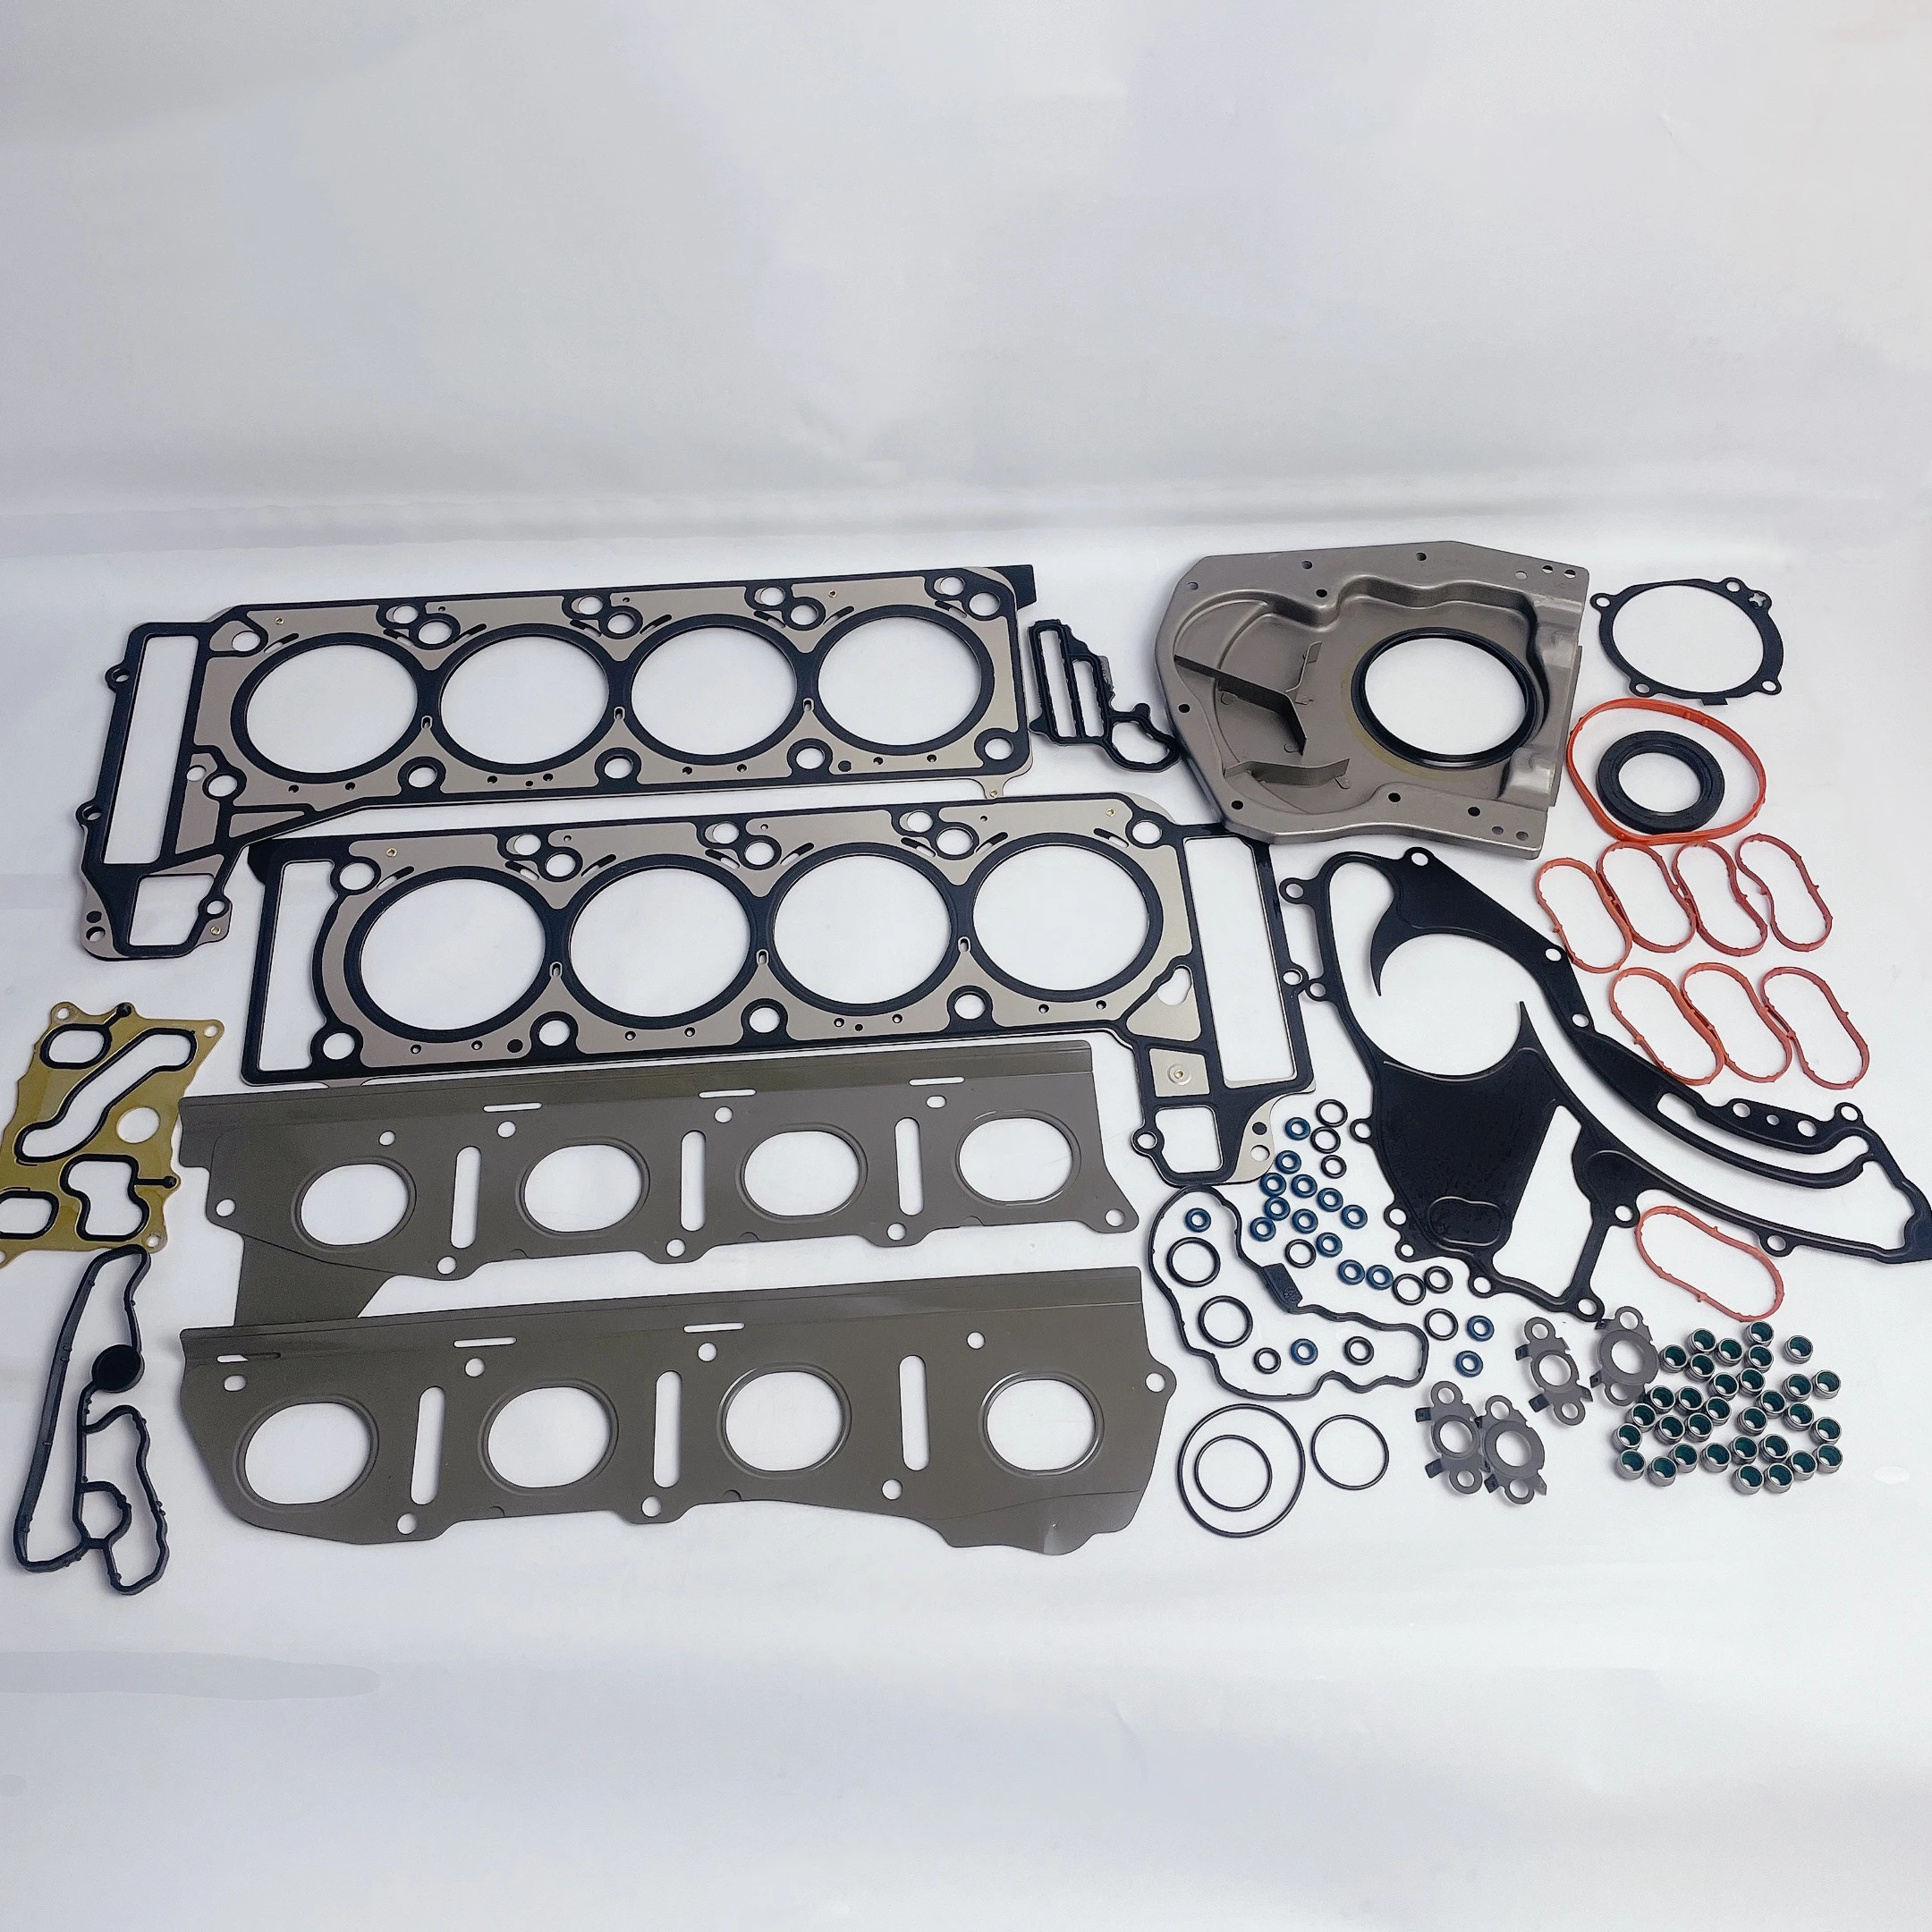 Wholesale KUSIMA factory cylinder Engine Gaskets Seals Kit For Mercedes-Benz  GLS550 S500 W221 W166 M278 4.6 4.7 V8 From